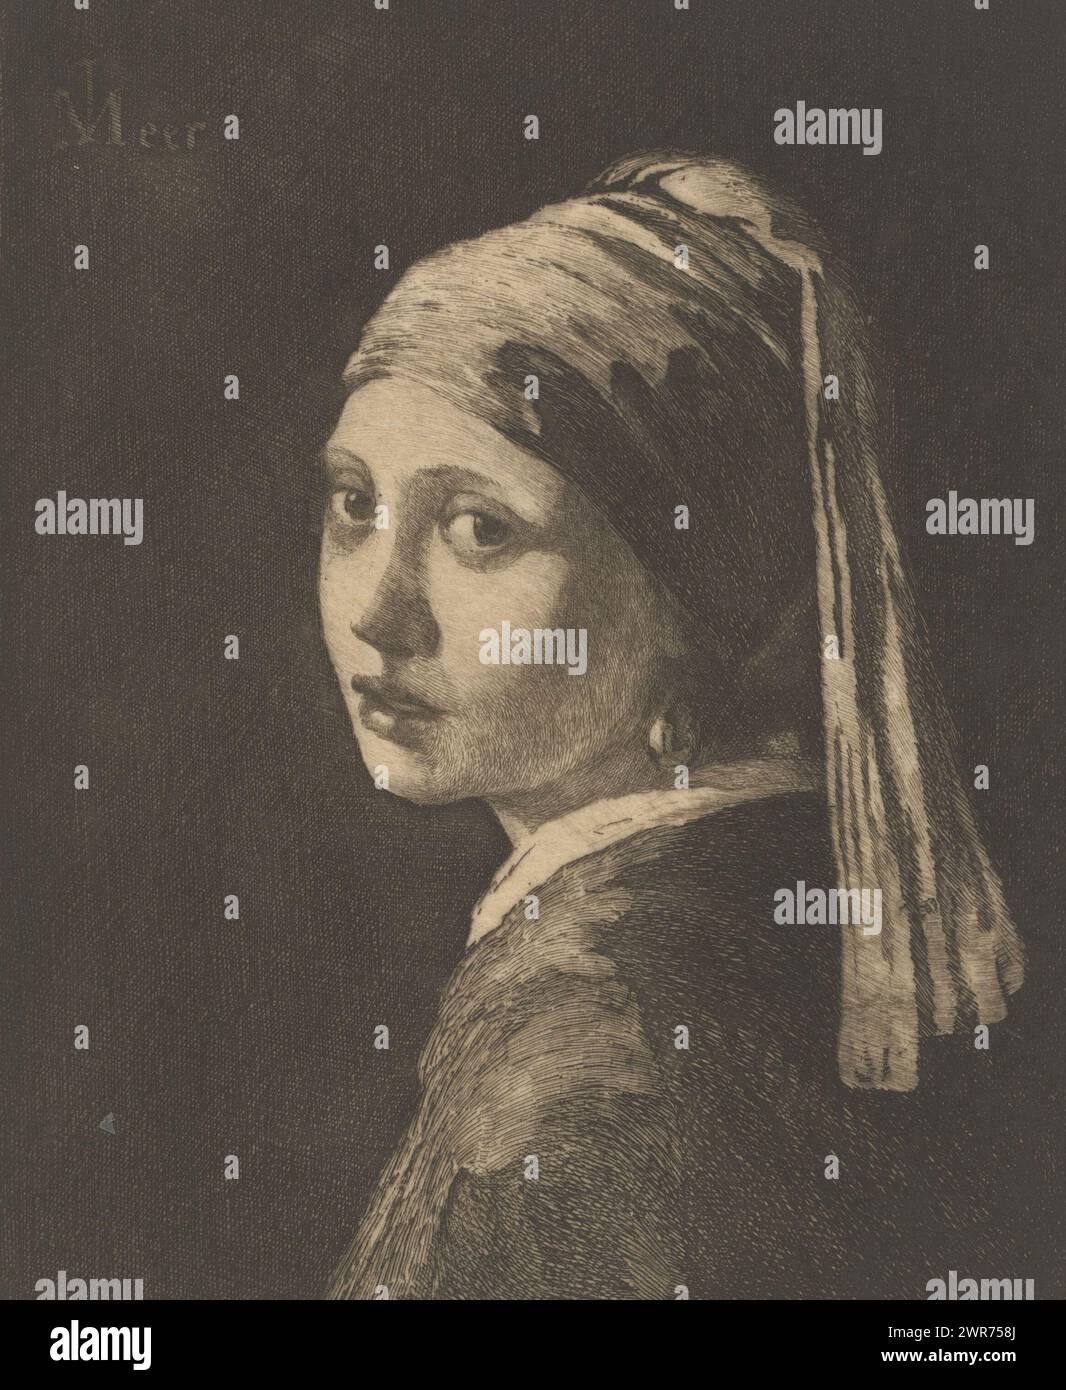 Girl with a Pearl Earring (original title), print maker: Philip Zilcken, (signed by artist), after painting by: Johannes Vermeer, 1867 - 1890, paper, etching, drypoint, height 210 mm × width 171 mm, print Stock Photo